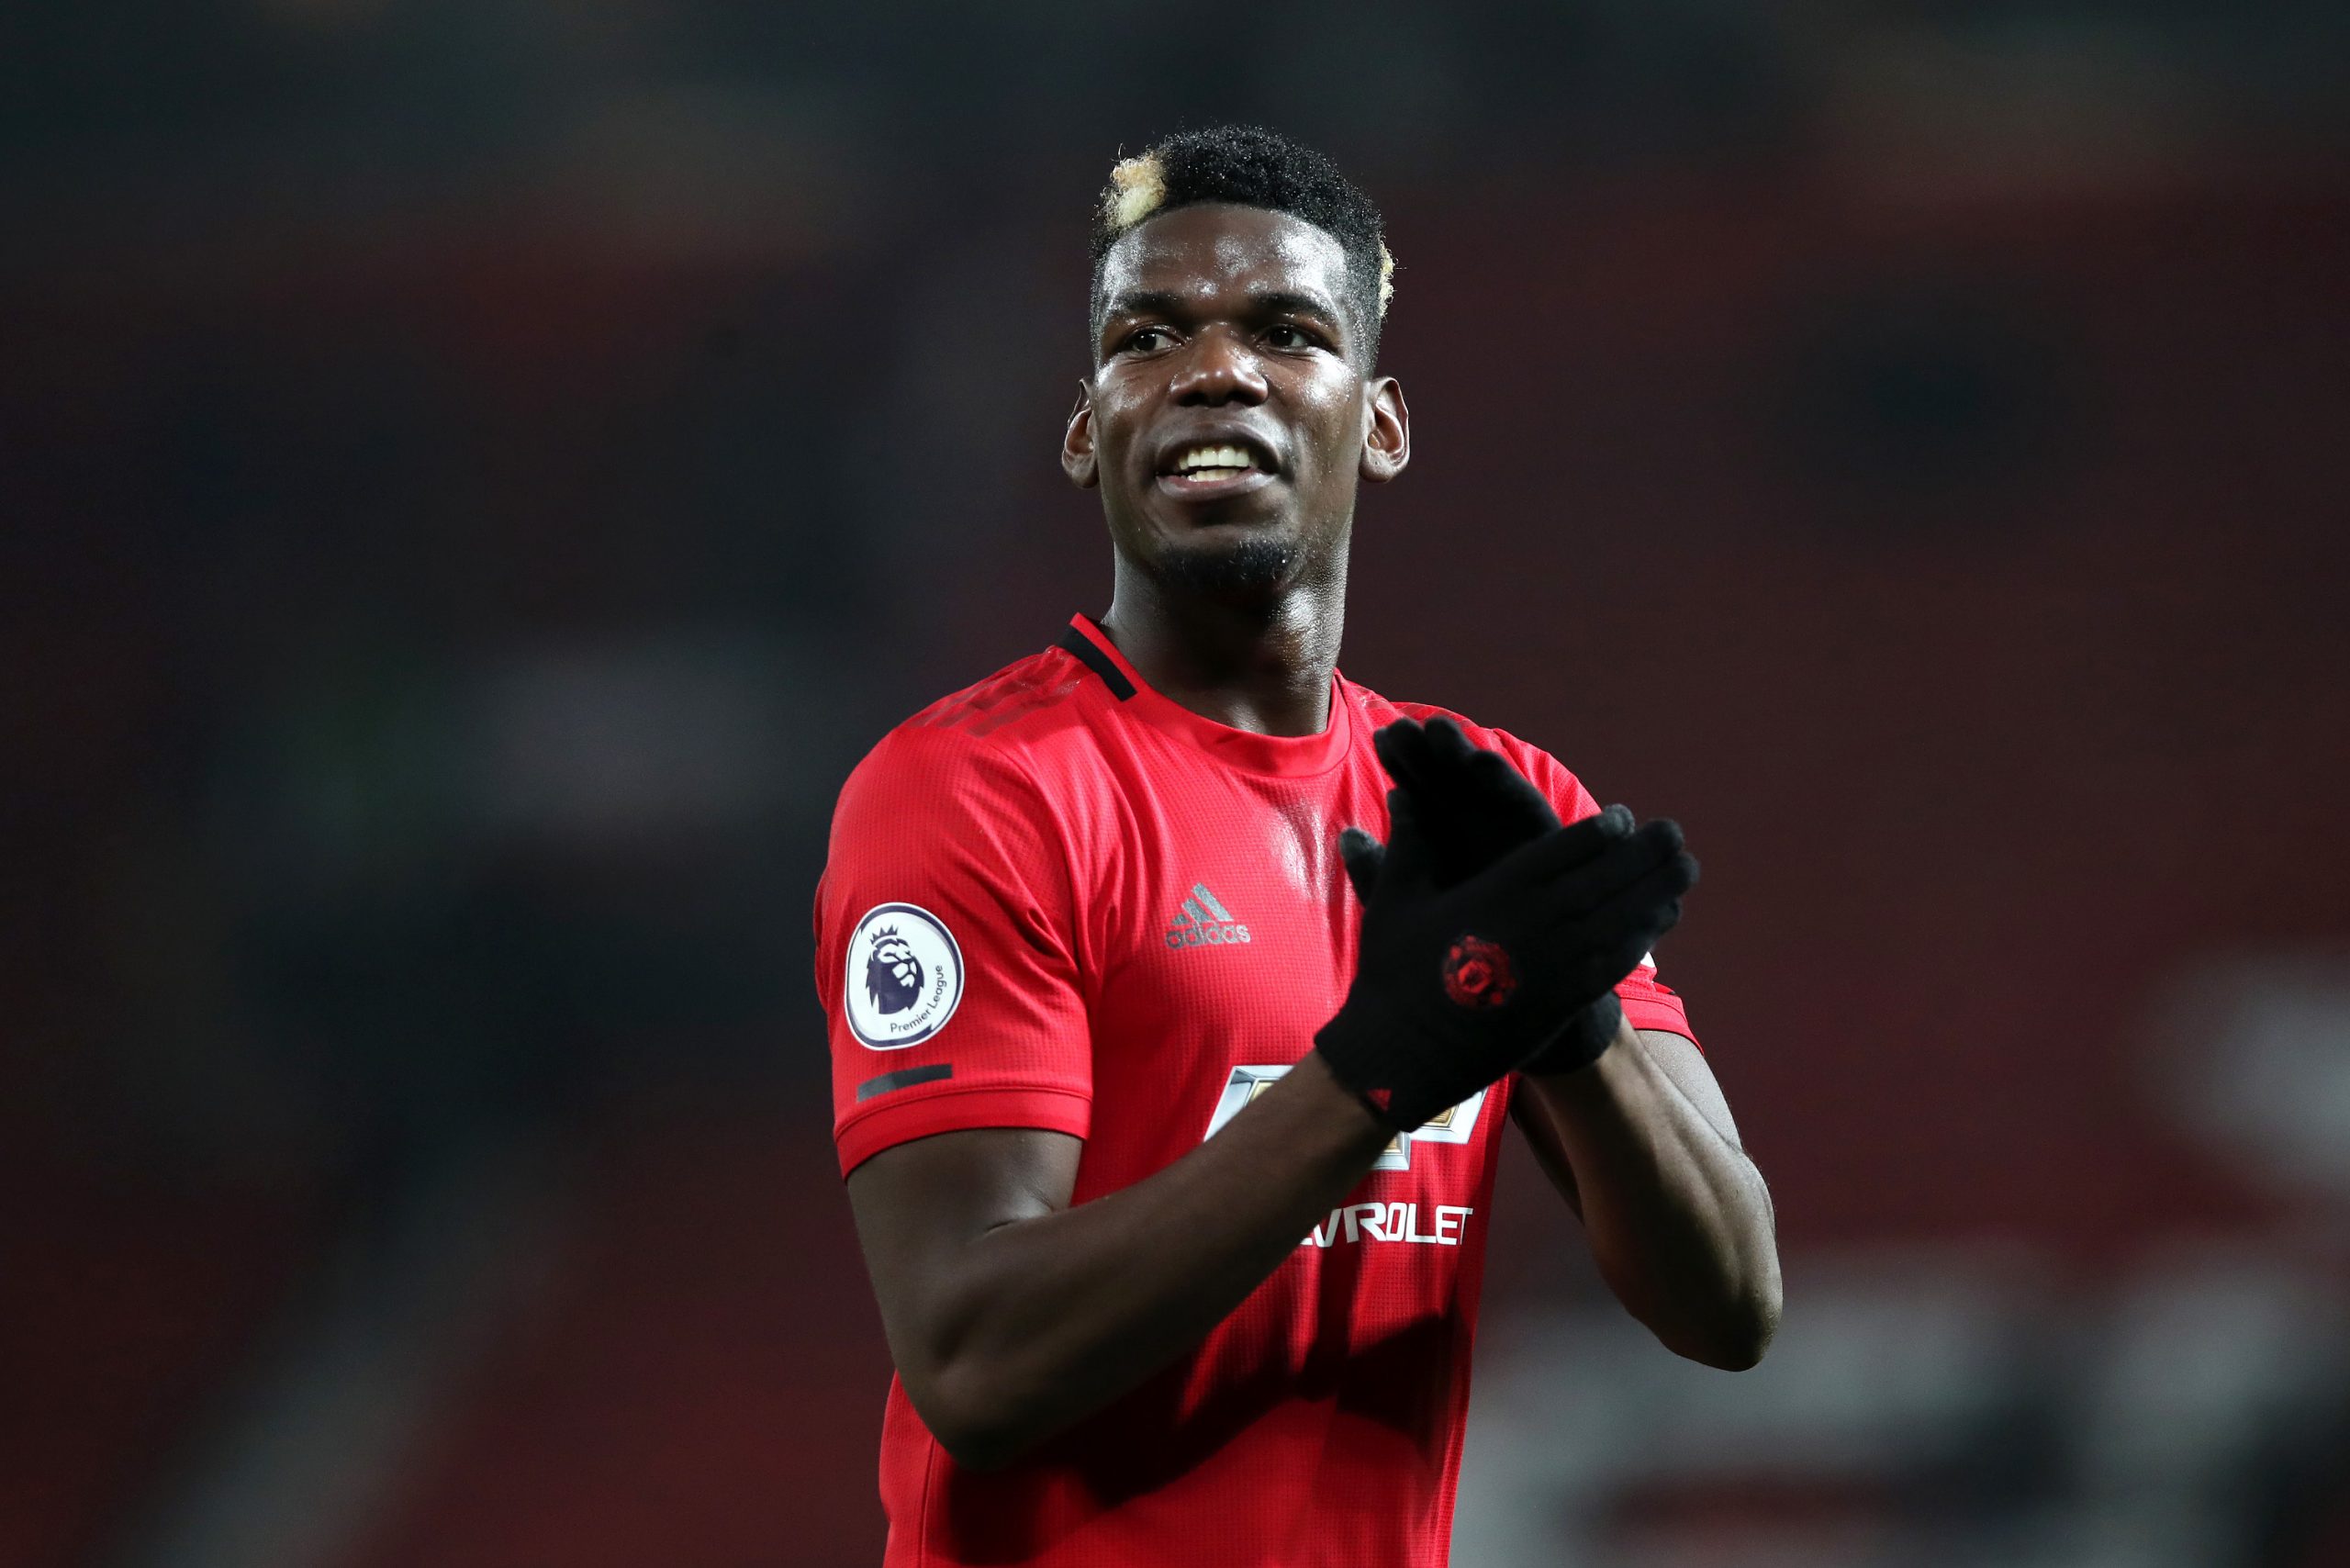 Paul Pogba Signs Deal With Amazon Prime To Make Documentary About His Life Called ‘The Pogmentary’